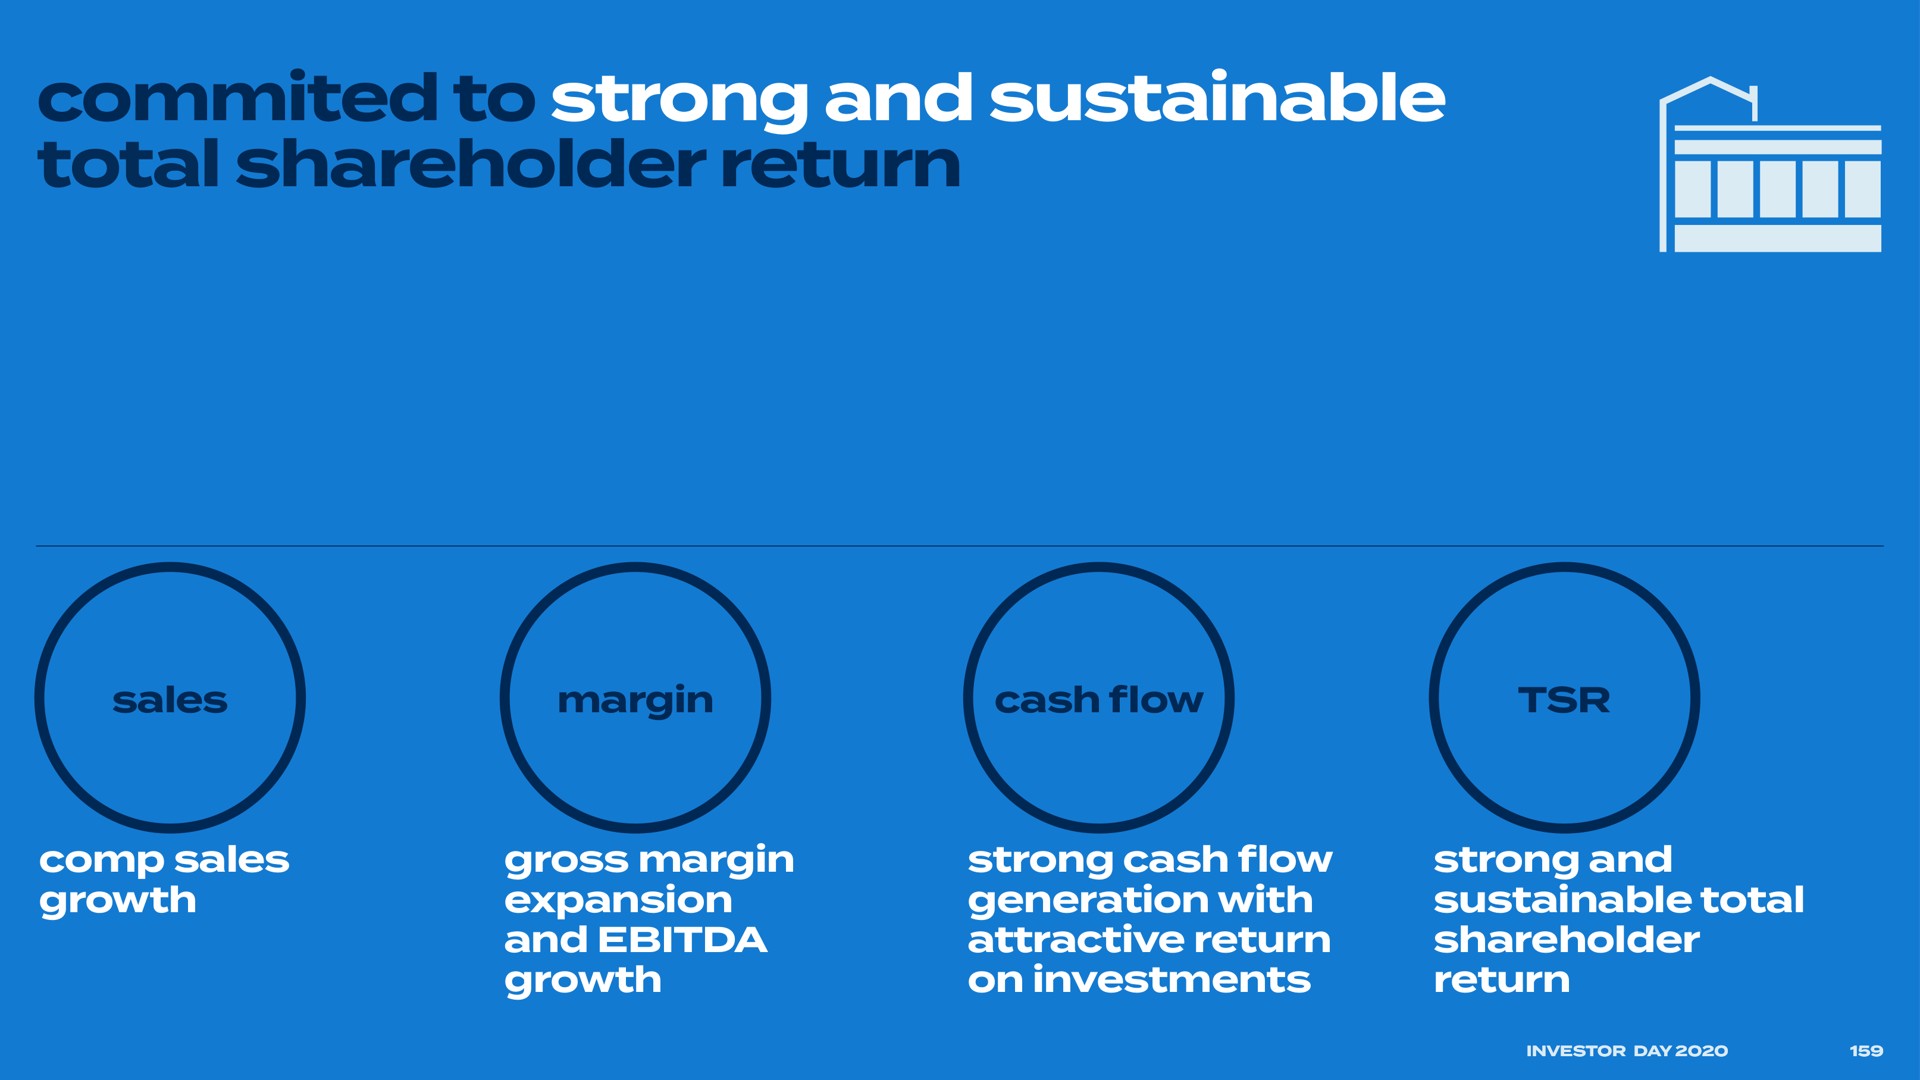 commited to strong and sustainable total shareholder return | Bed Bath & Beyond